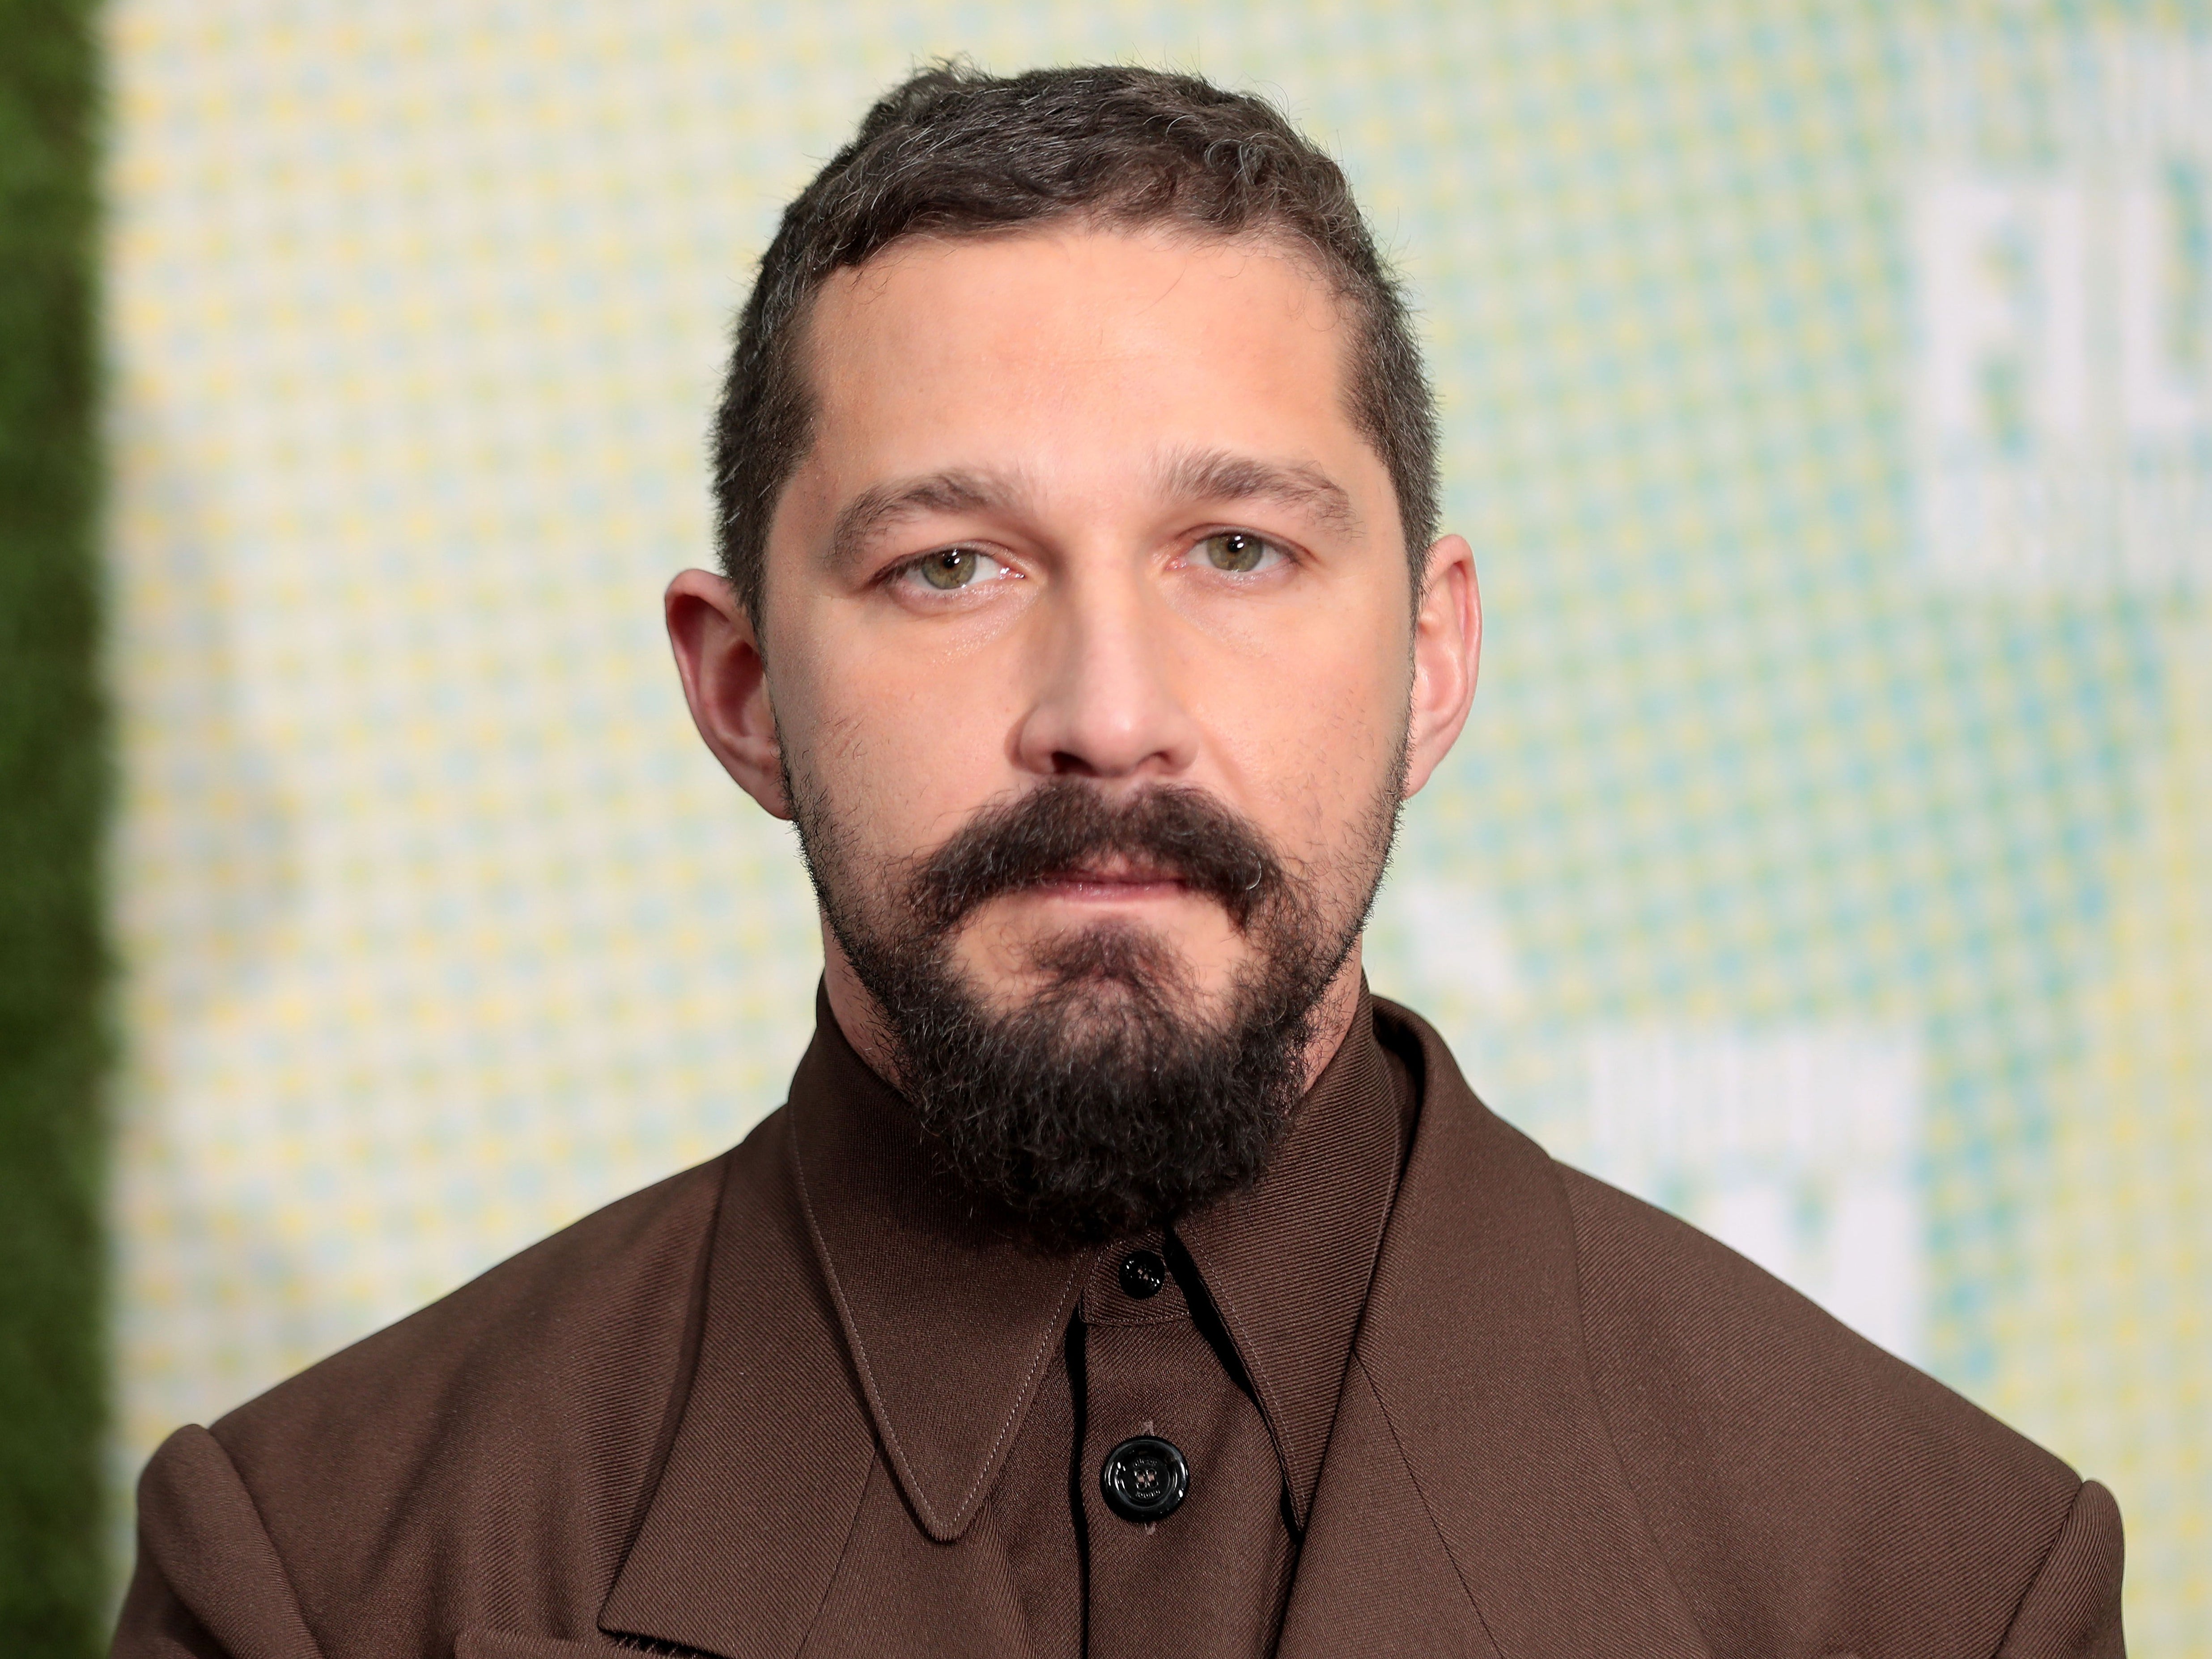 Shia LaBeouf is being sued by former partner FKA twigs over claims of abuse